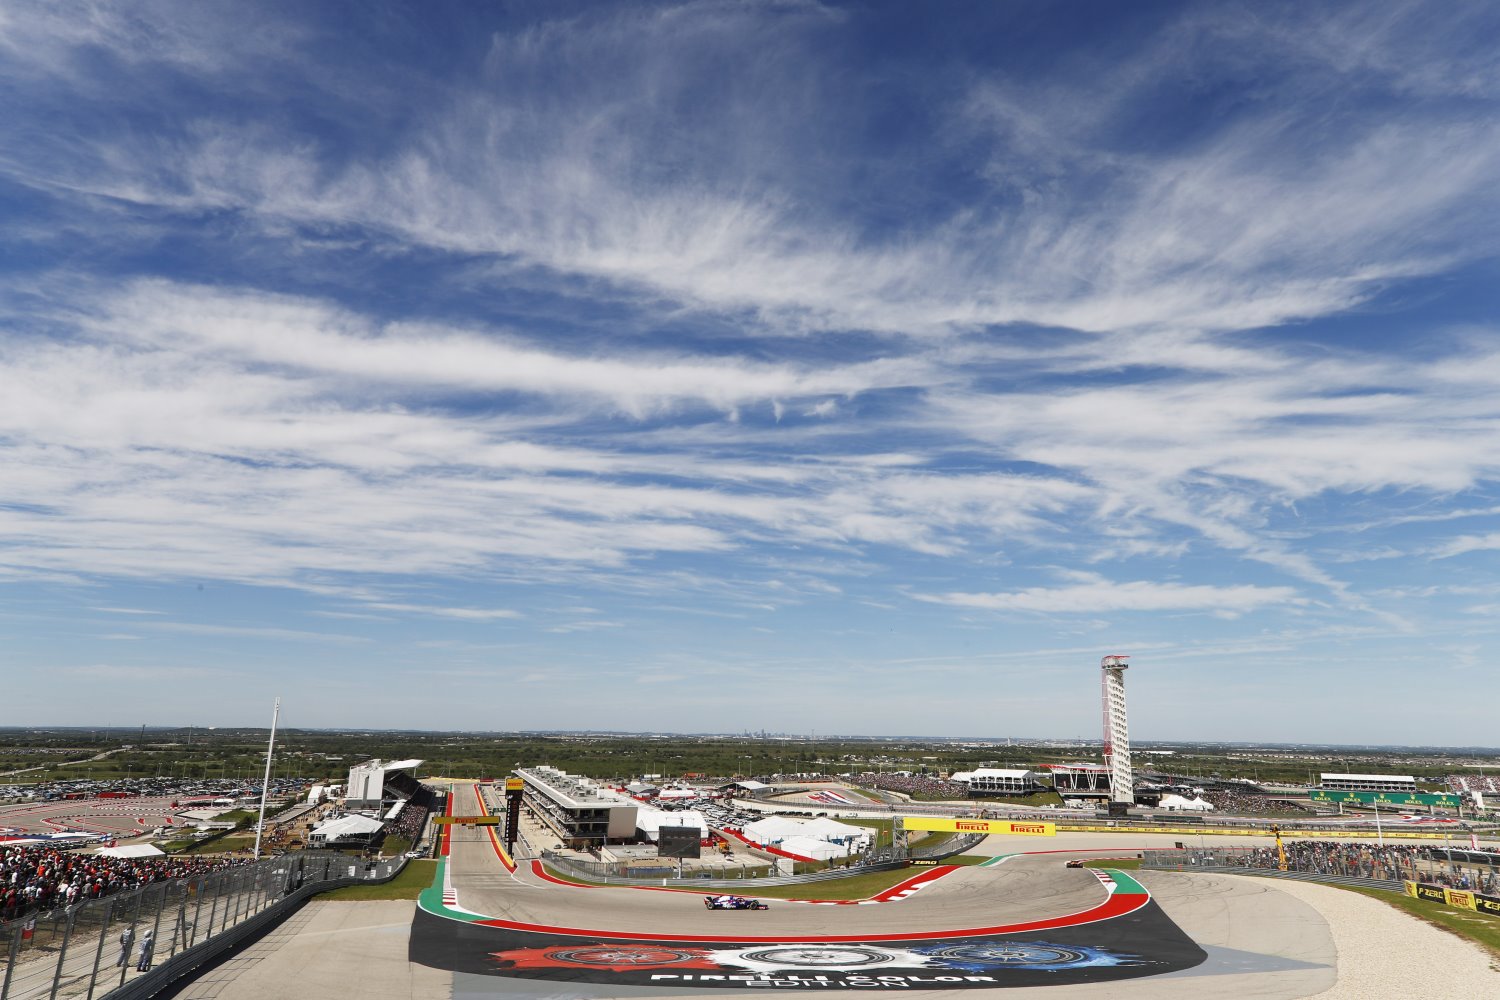 Will IndyCar be able to fill the massive COTA grandstands